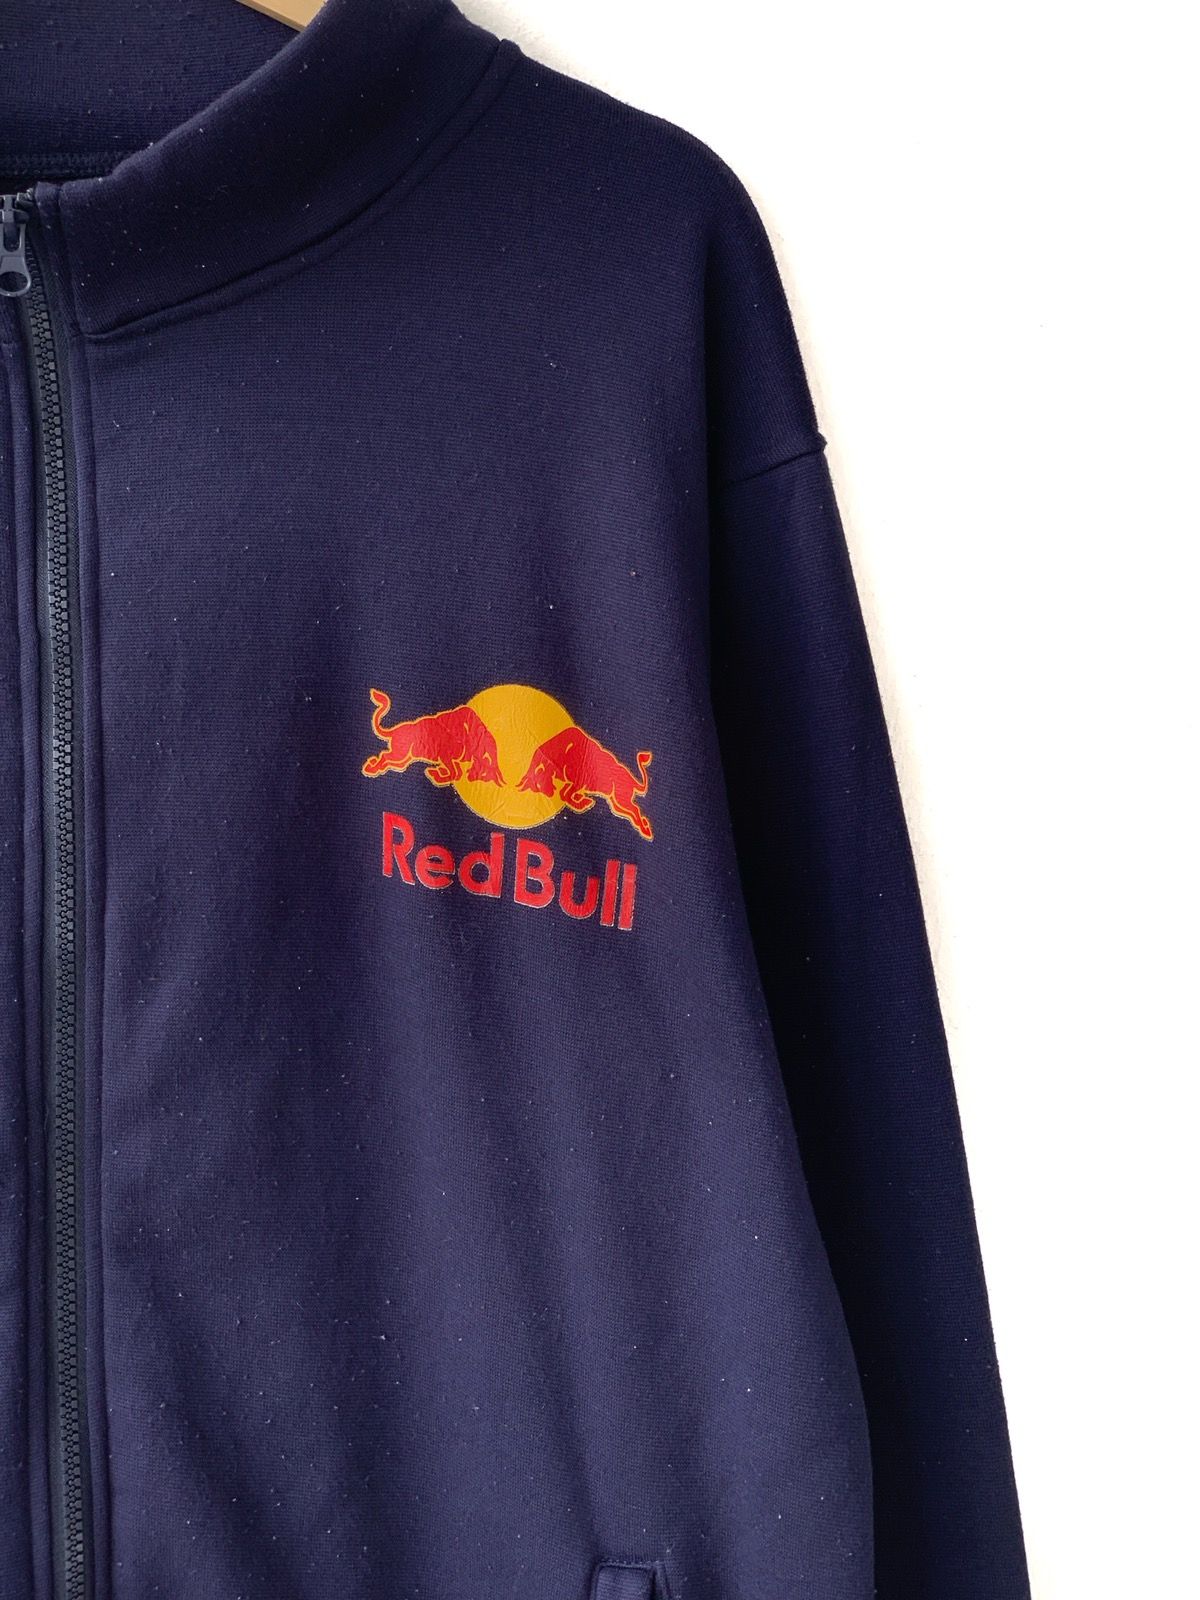 Red Bull Vintage Red Bull Sweatshirt Size US XL / EU 56 / 4 - 4 Preview